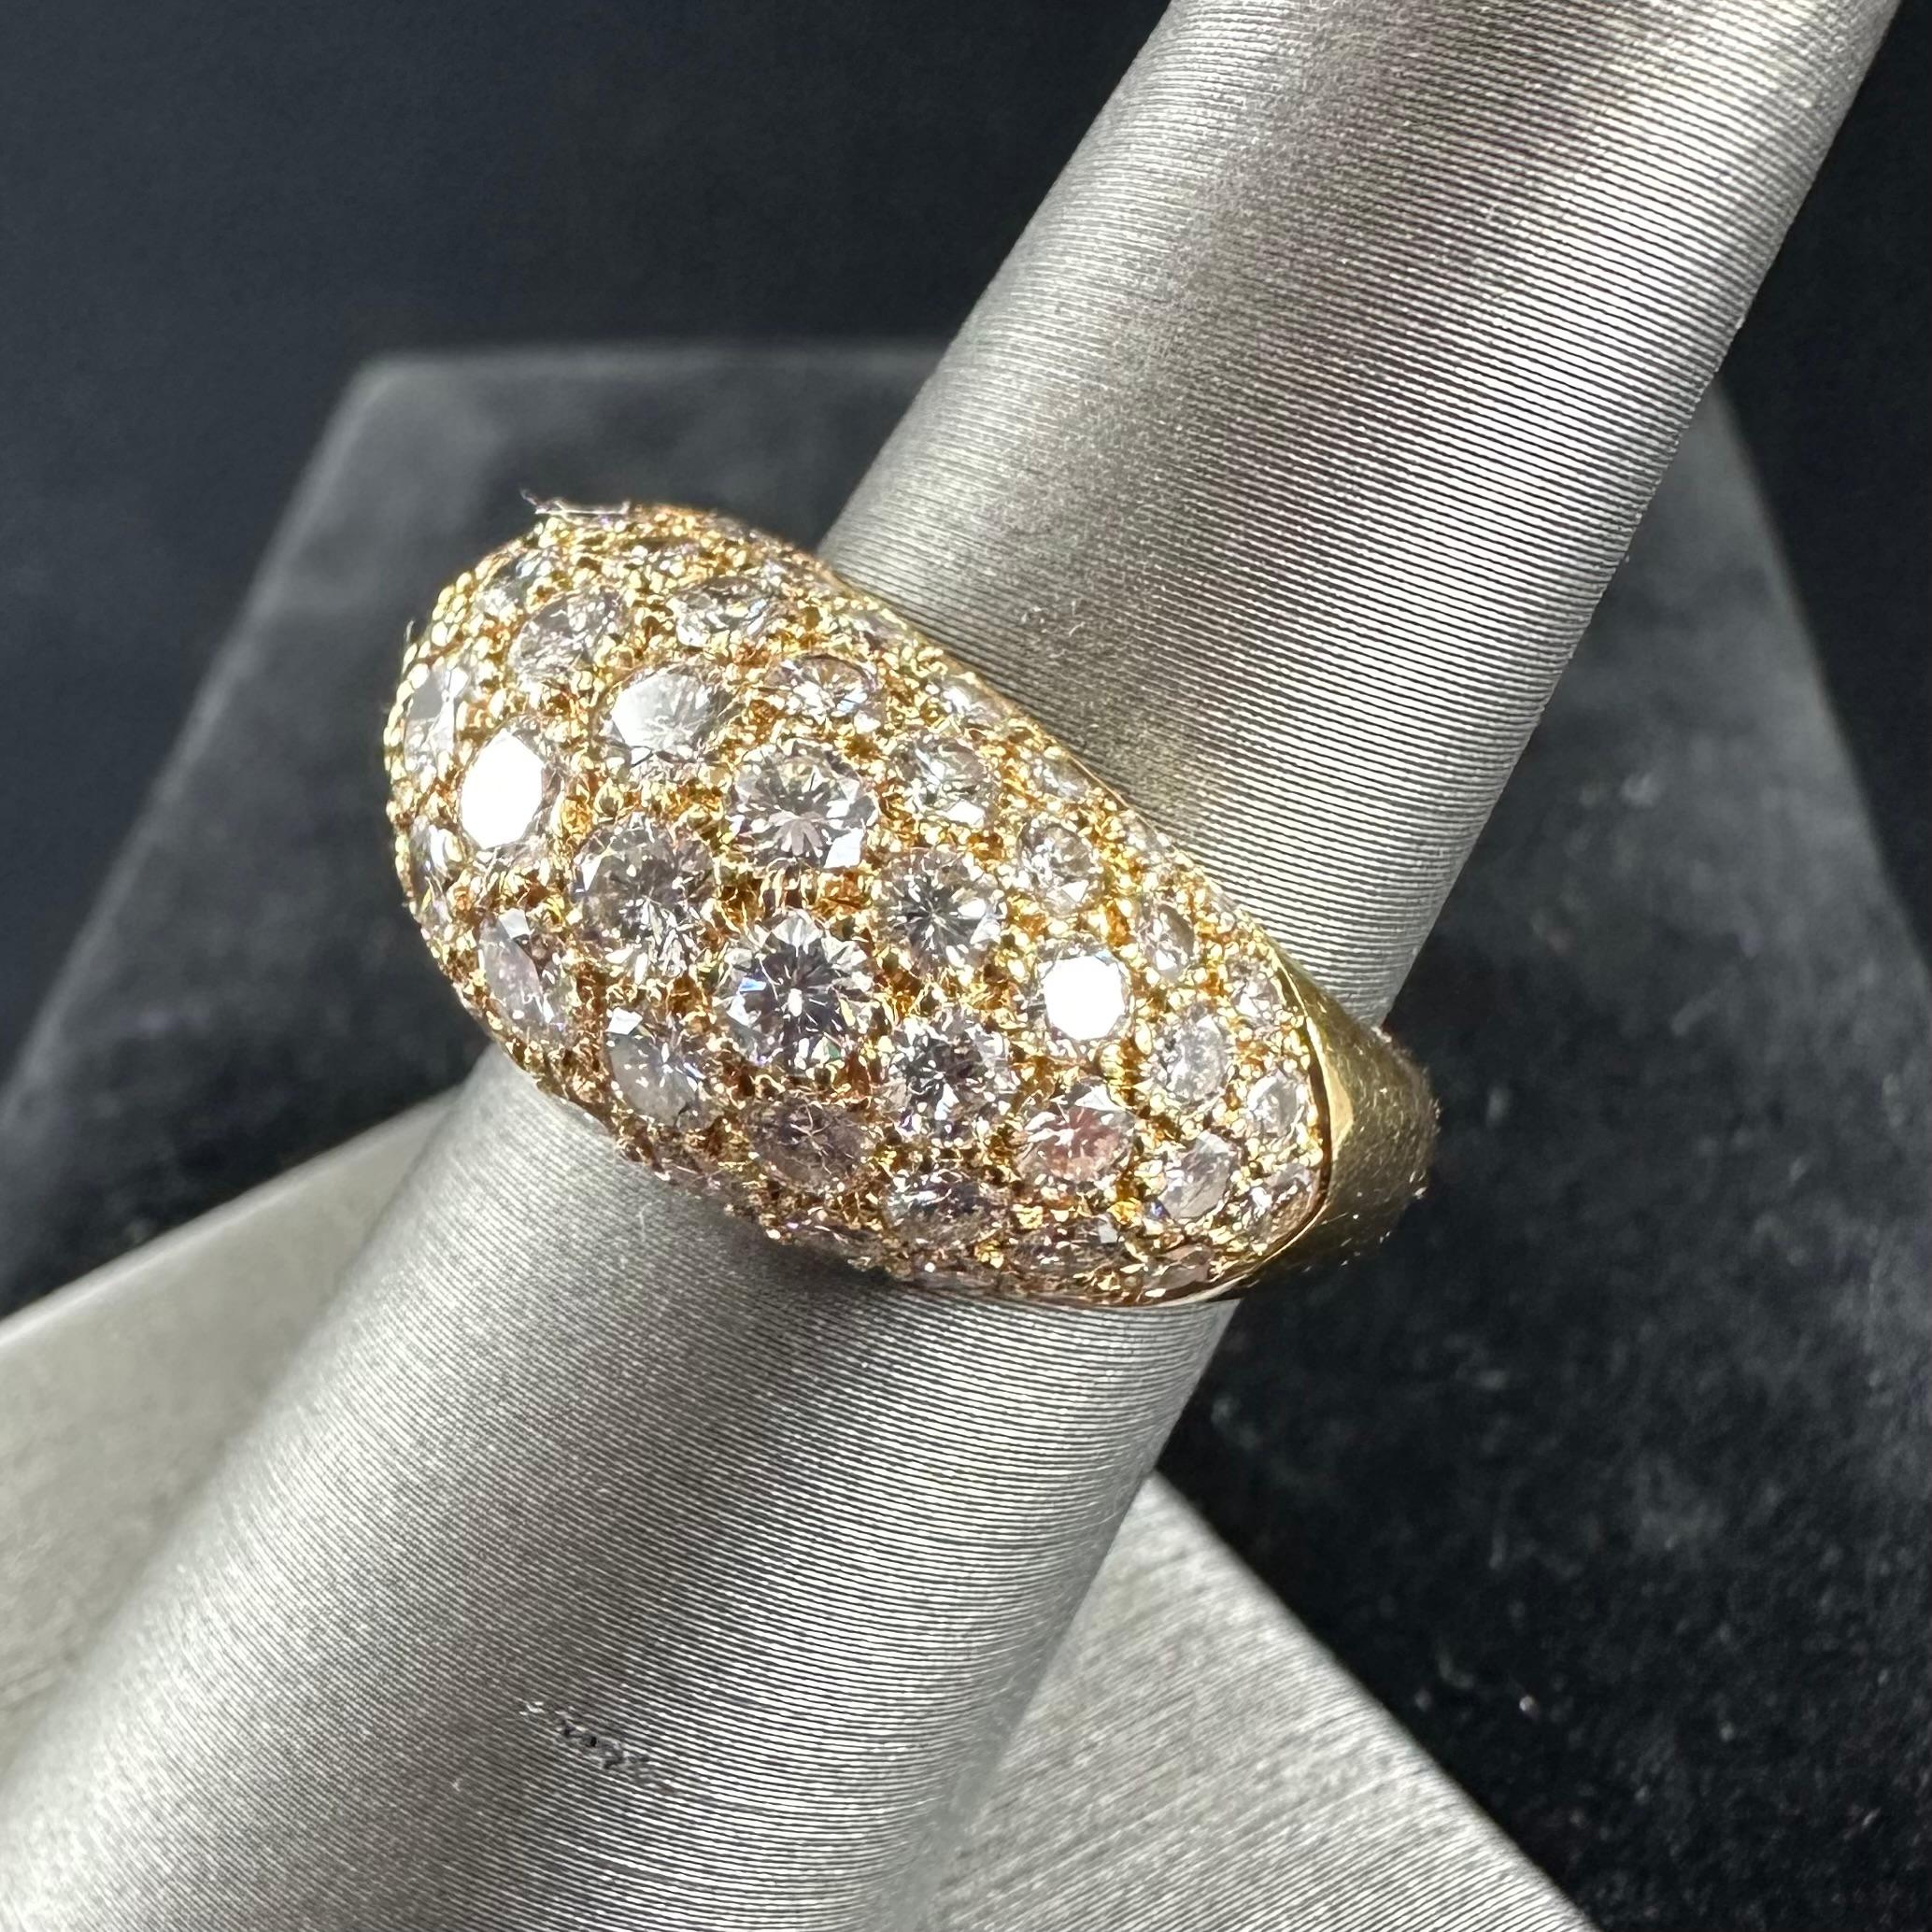 Created circa 1995, this Van Cleef & Arpels NY diamond bombé ring is set in 18K  Yellow gold. The high domed form is pave-set with round brilliant-cut diamonds Estimated 3.15 cts 
Beautifully balanced this sparkling white Diamonds cocktail ring